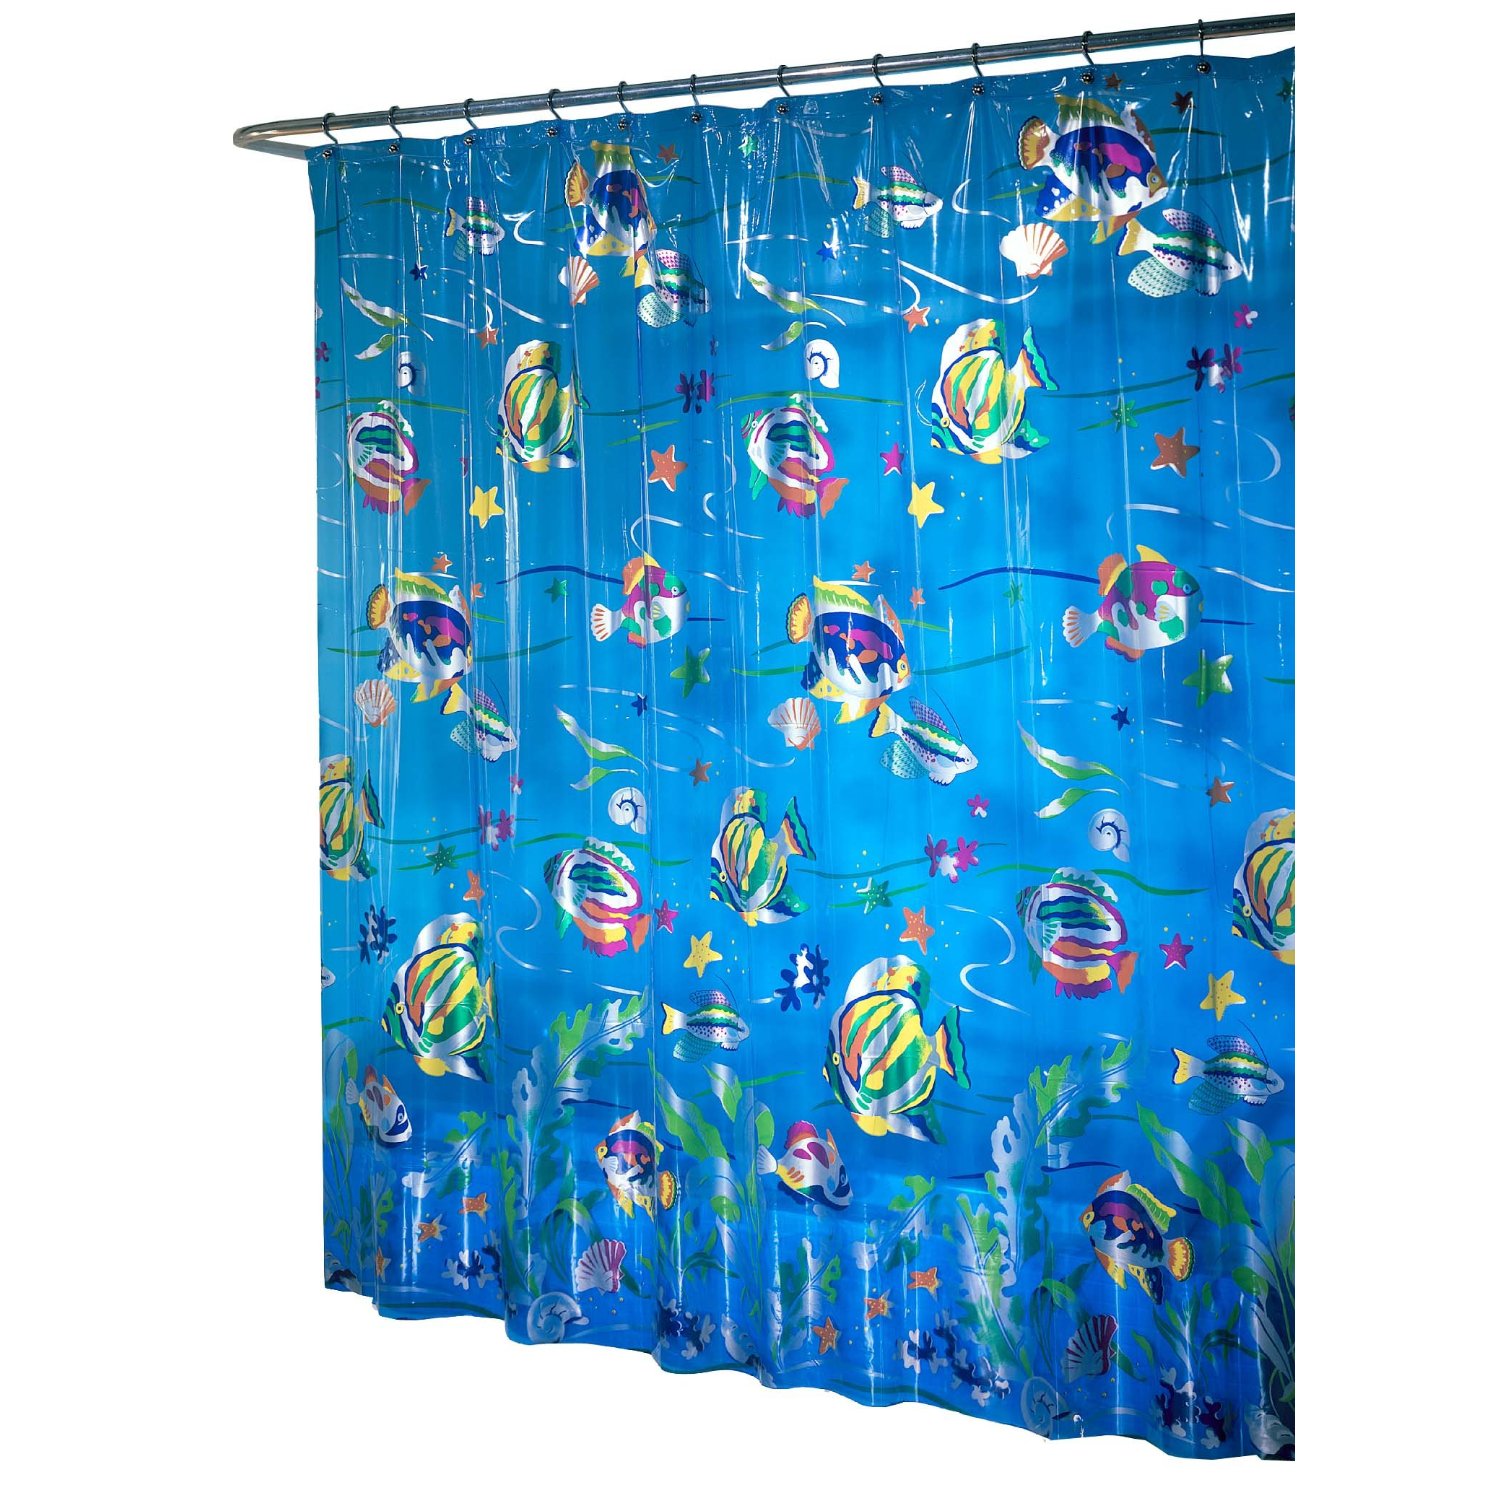 Ex-Cell Home Fashions Deep Sea Shower Curtain, Multi-Color